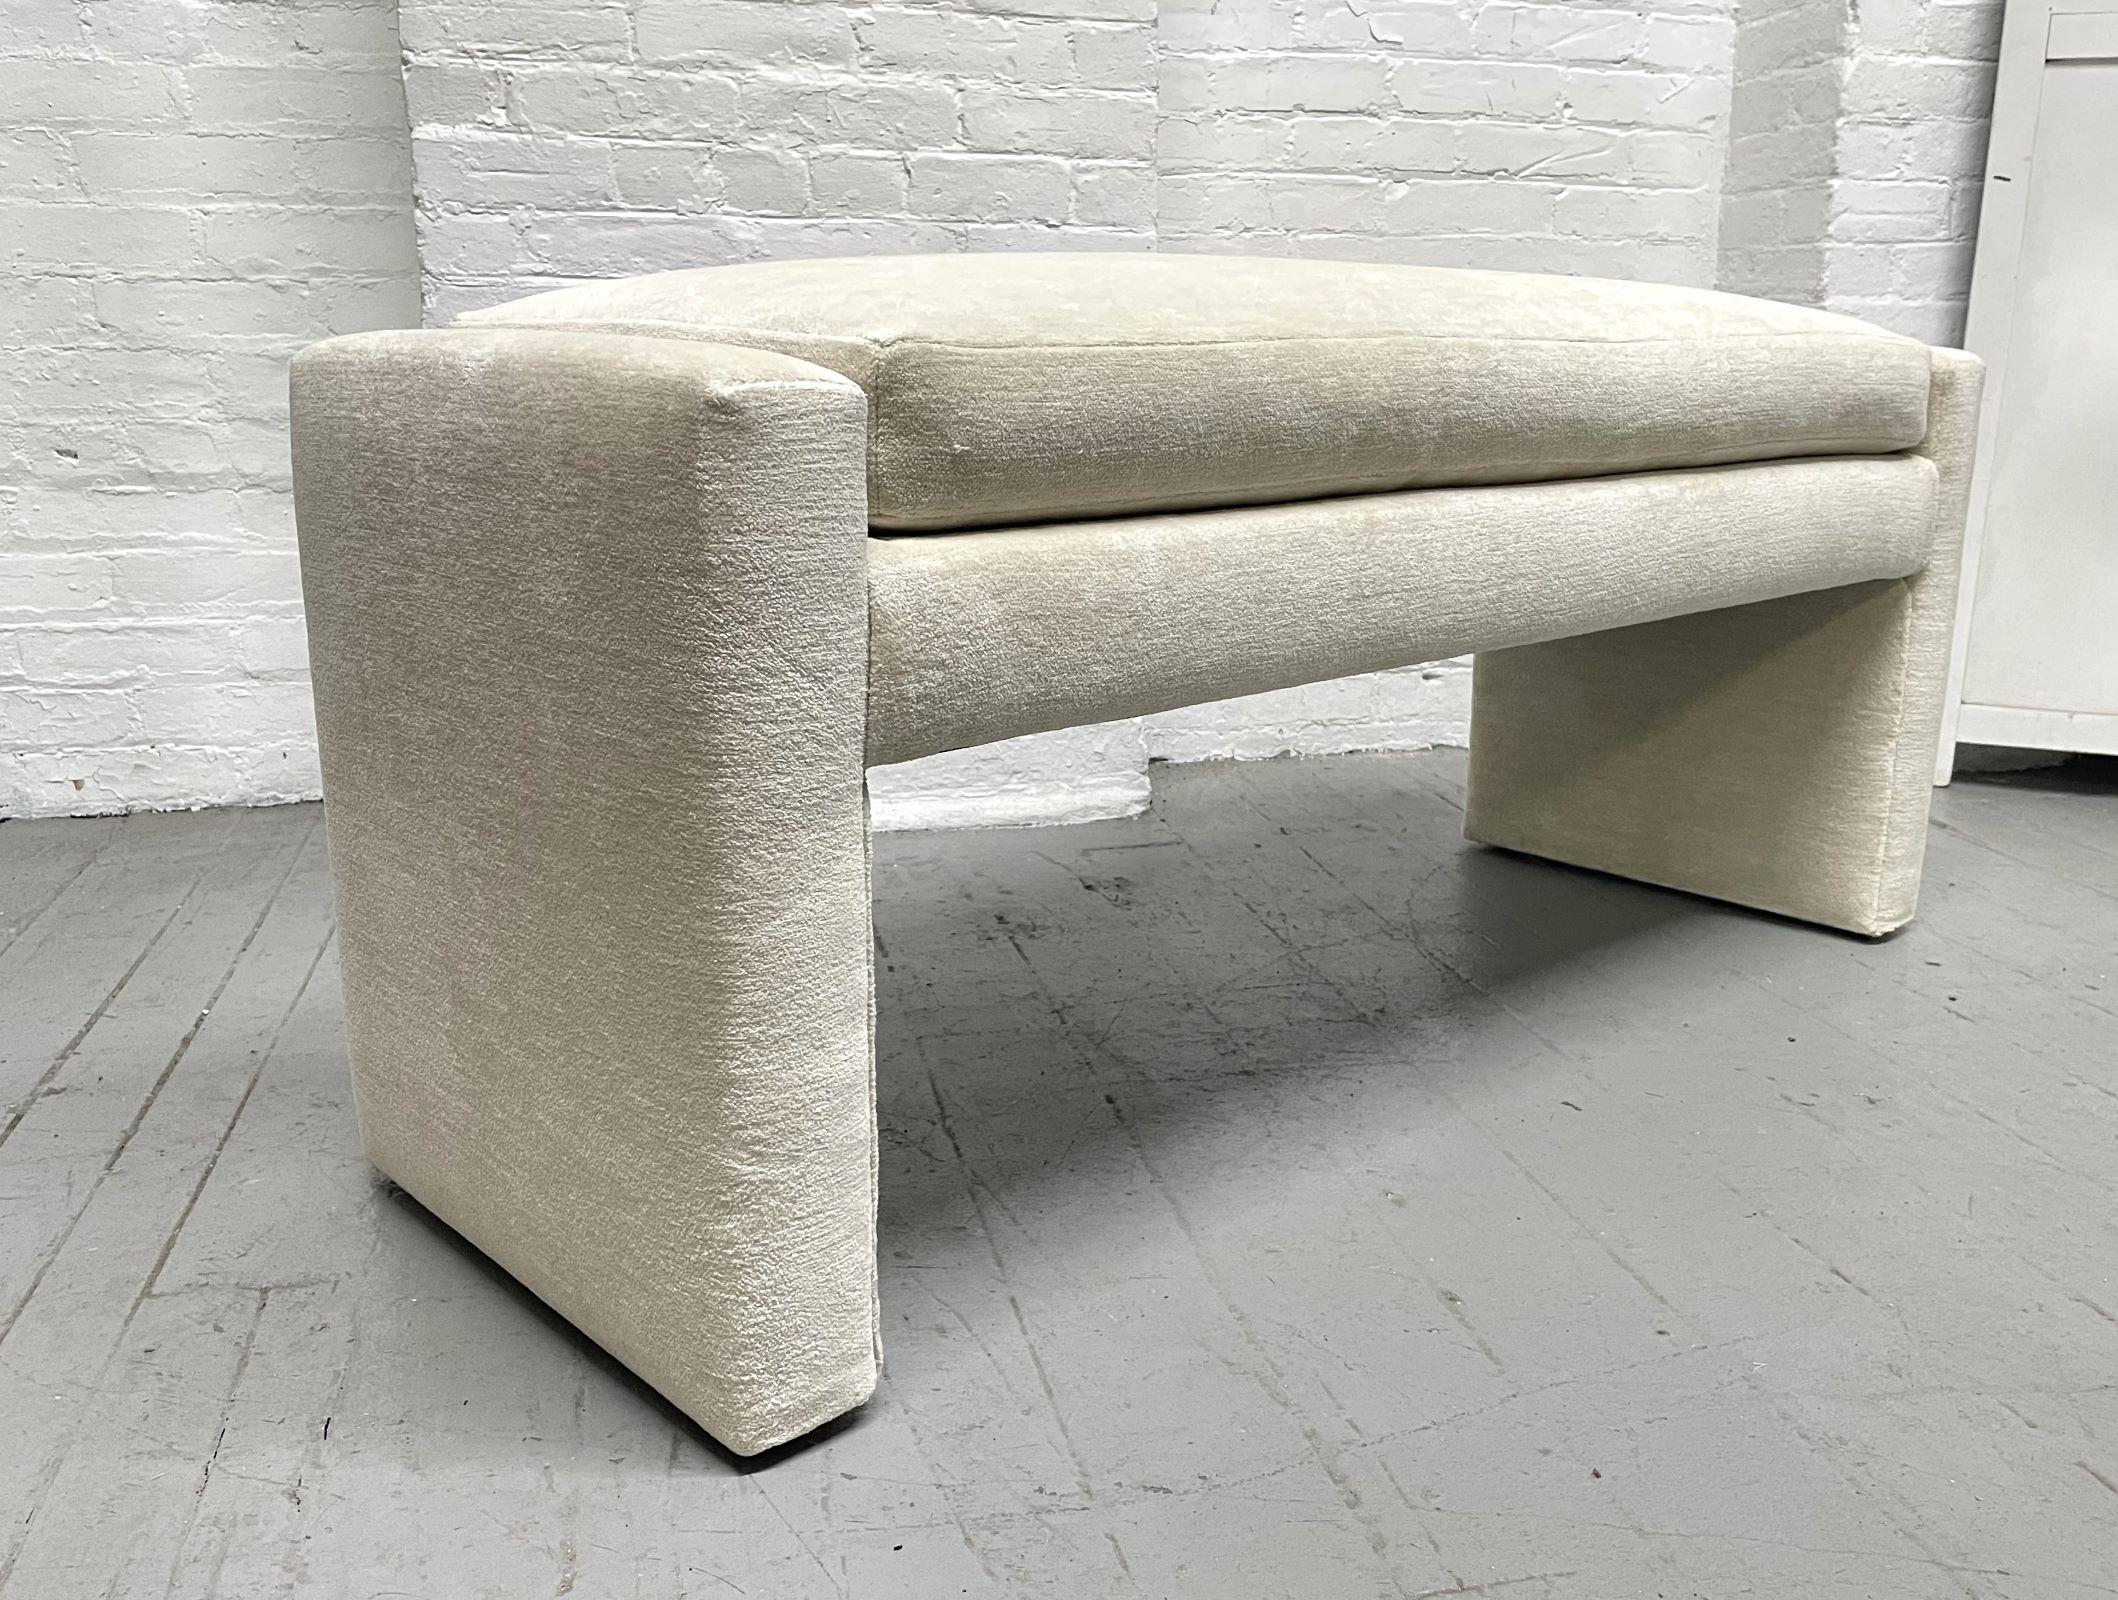 Upholstered bench by Directional. The bench has an off-white upholstery with a loose cushioned seat.